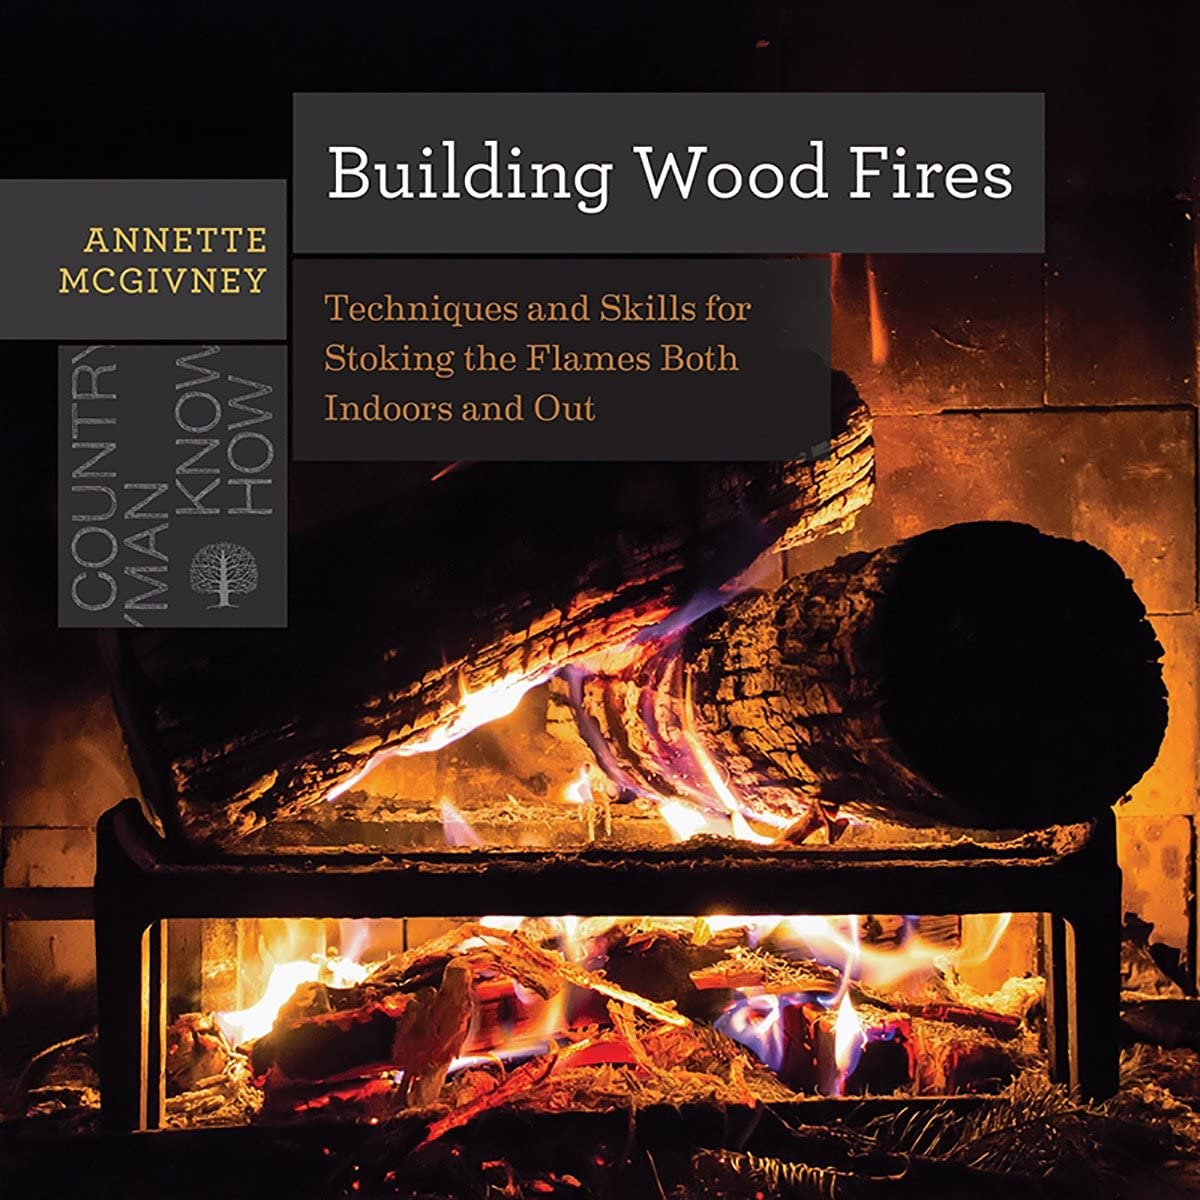 Building Wood Fires